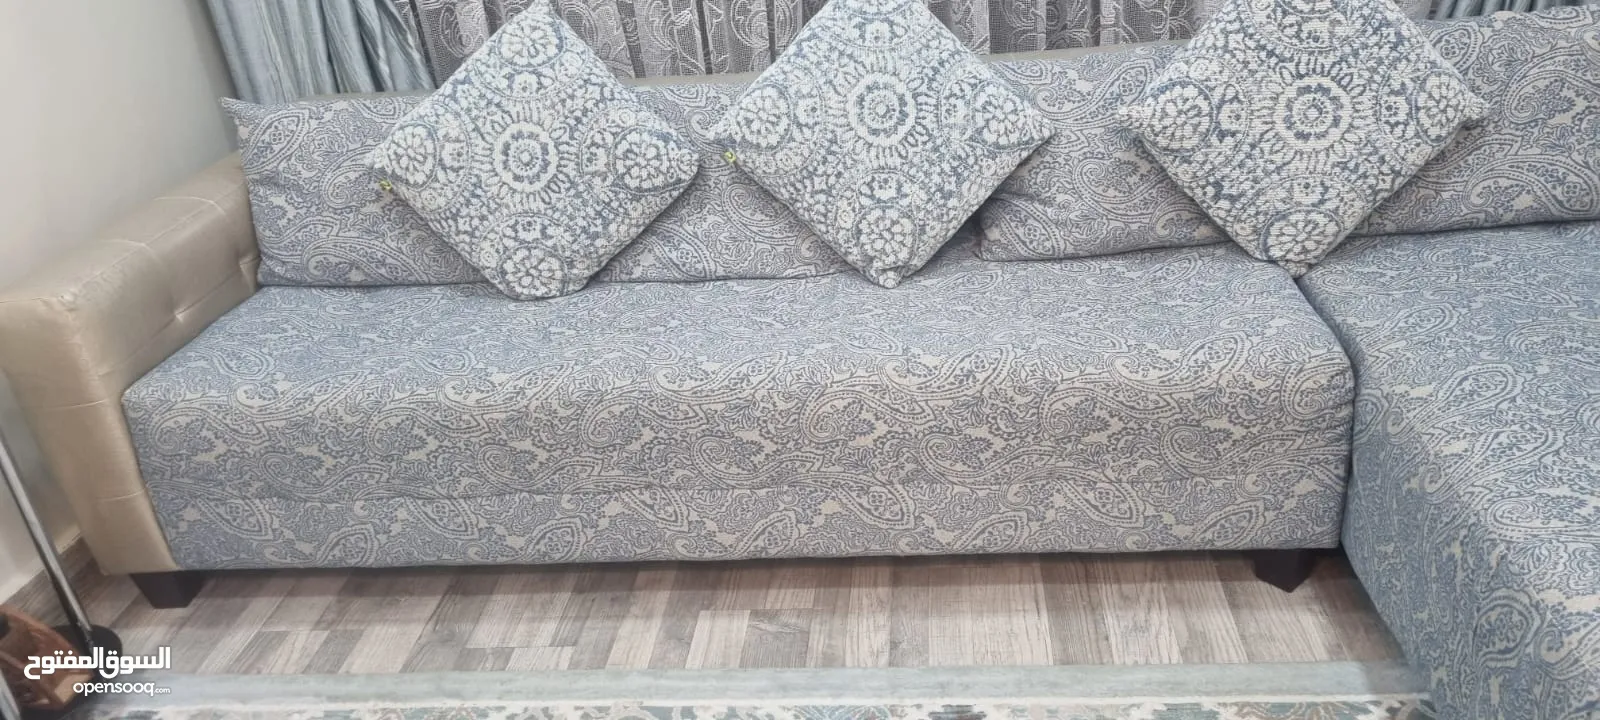 L shaped sofa set from banta on sale